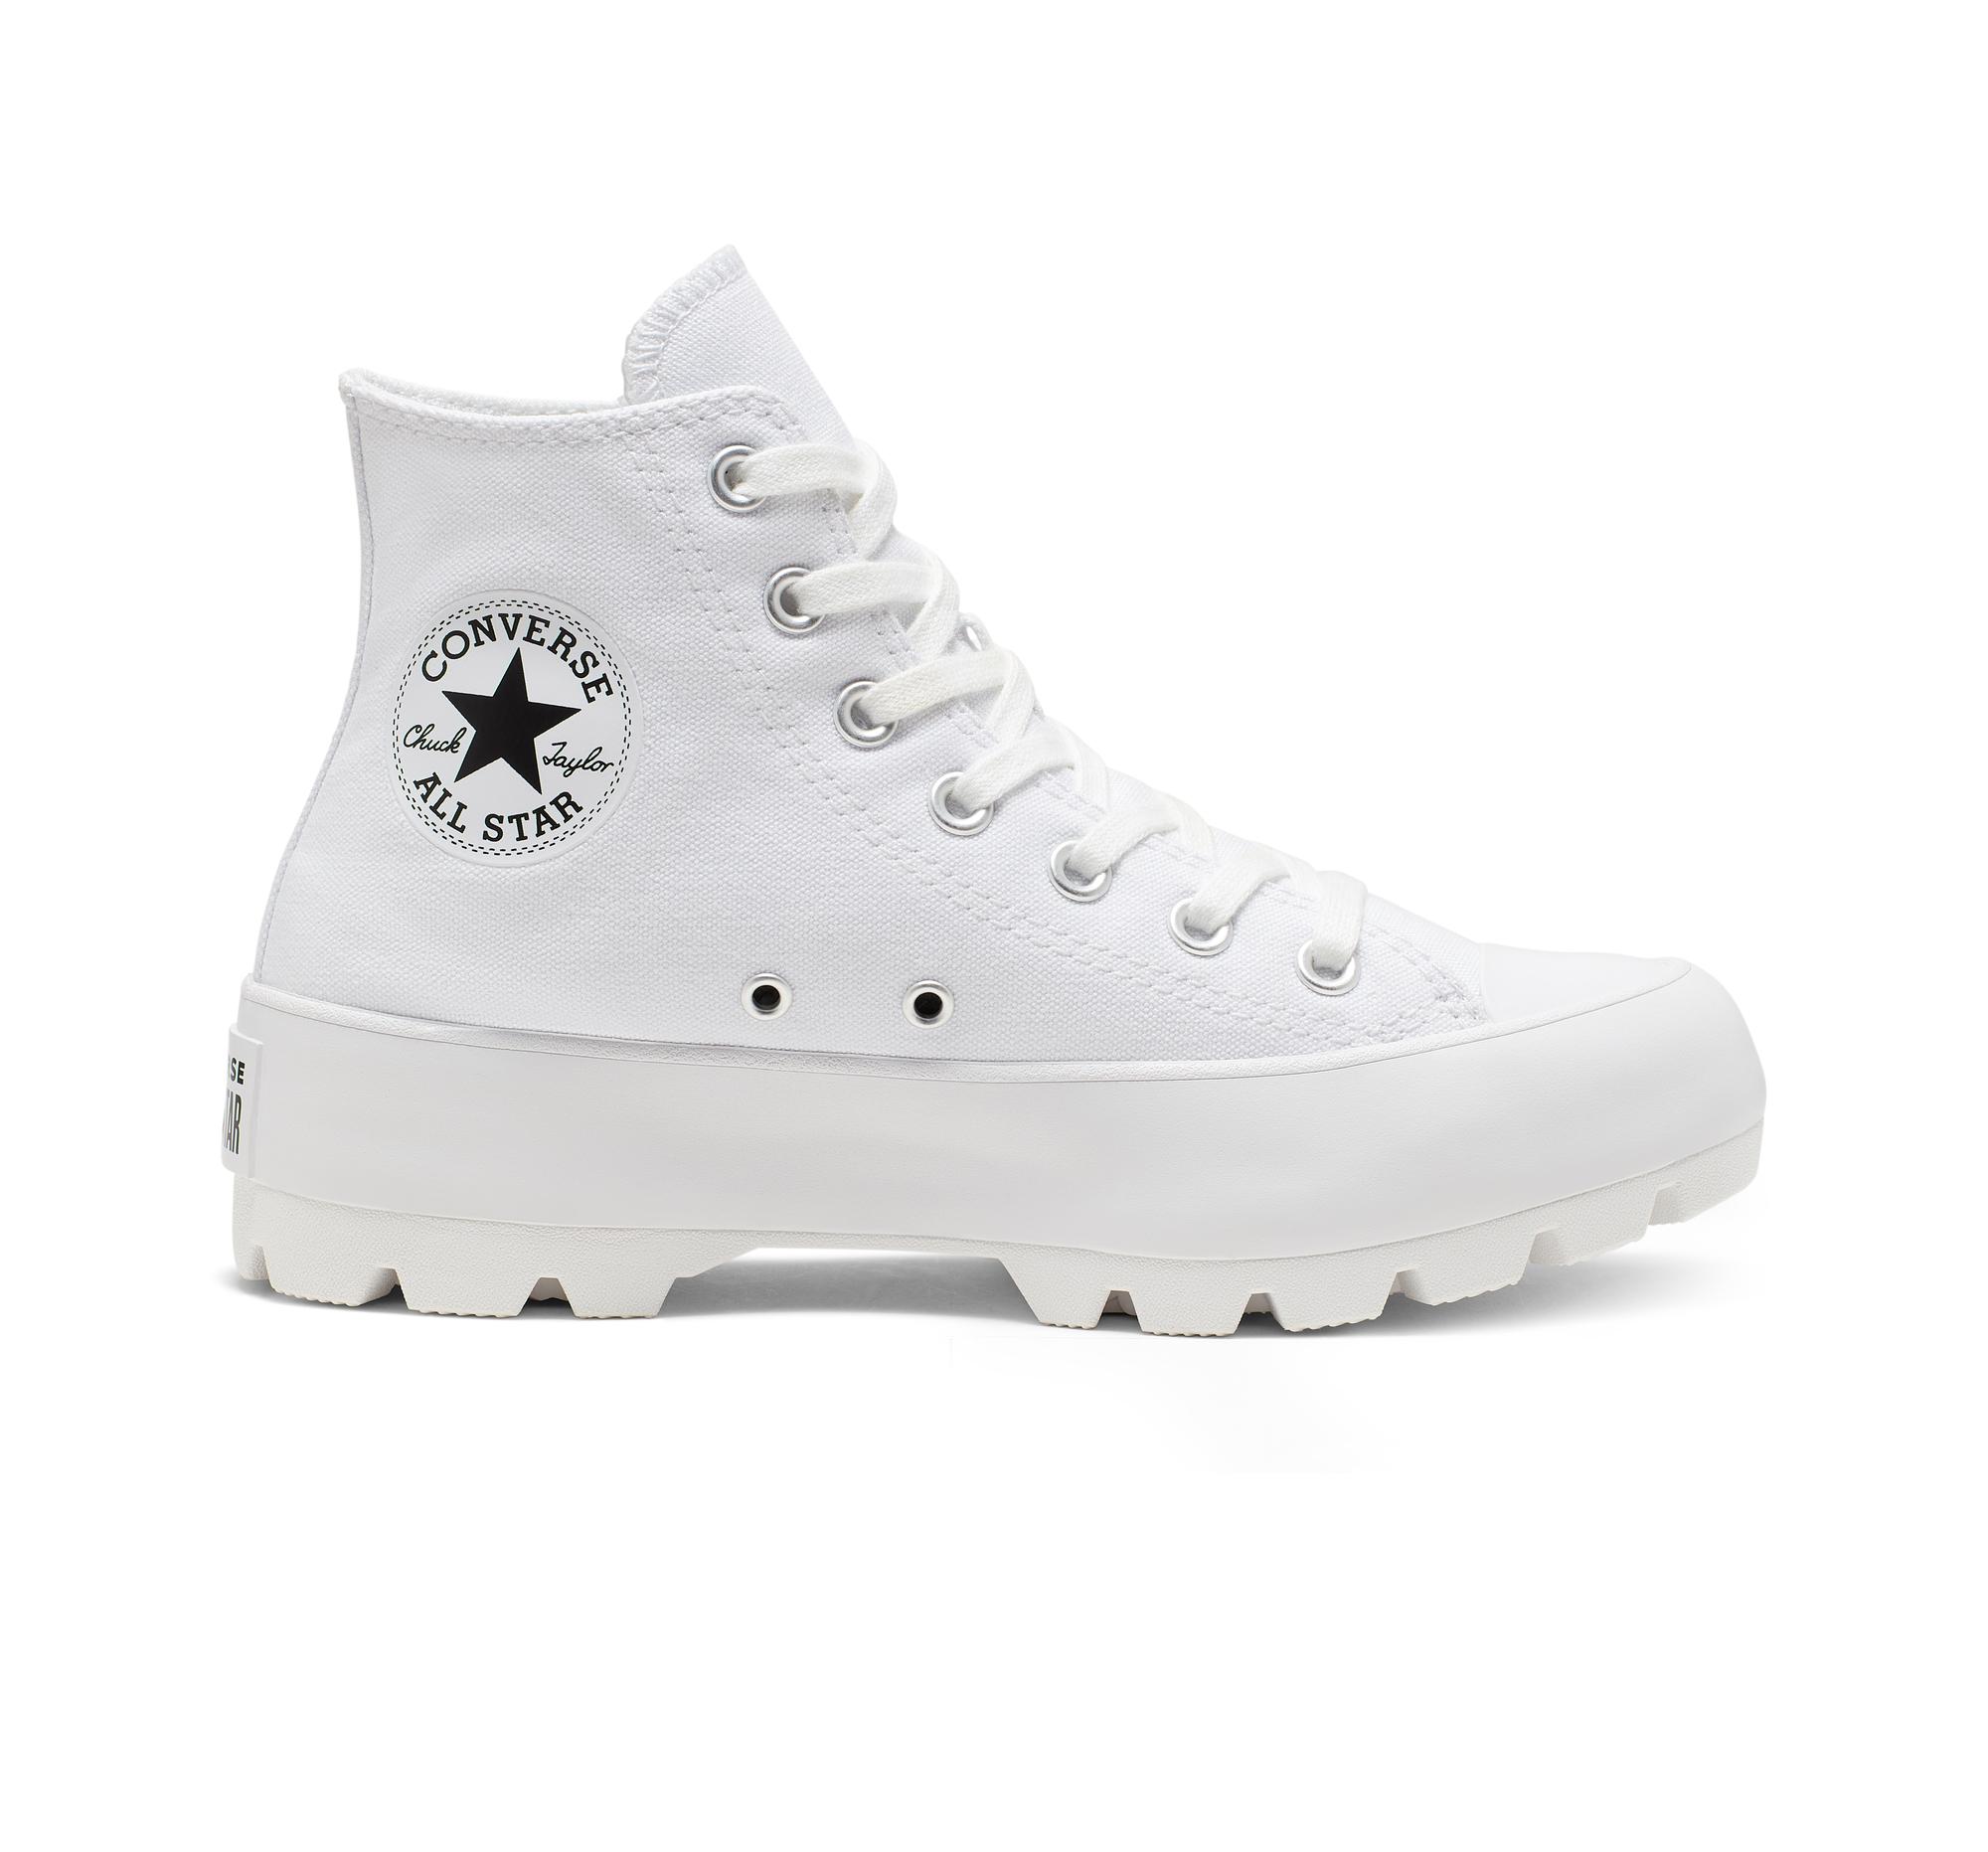 Converse Fleece Chuck Taylor All Star Lugged - Hi in White - Lyst